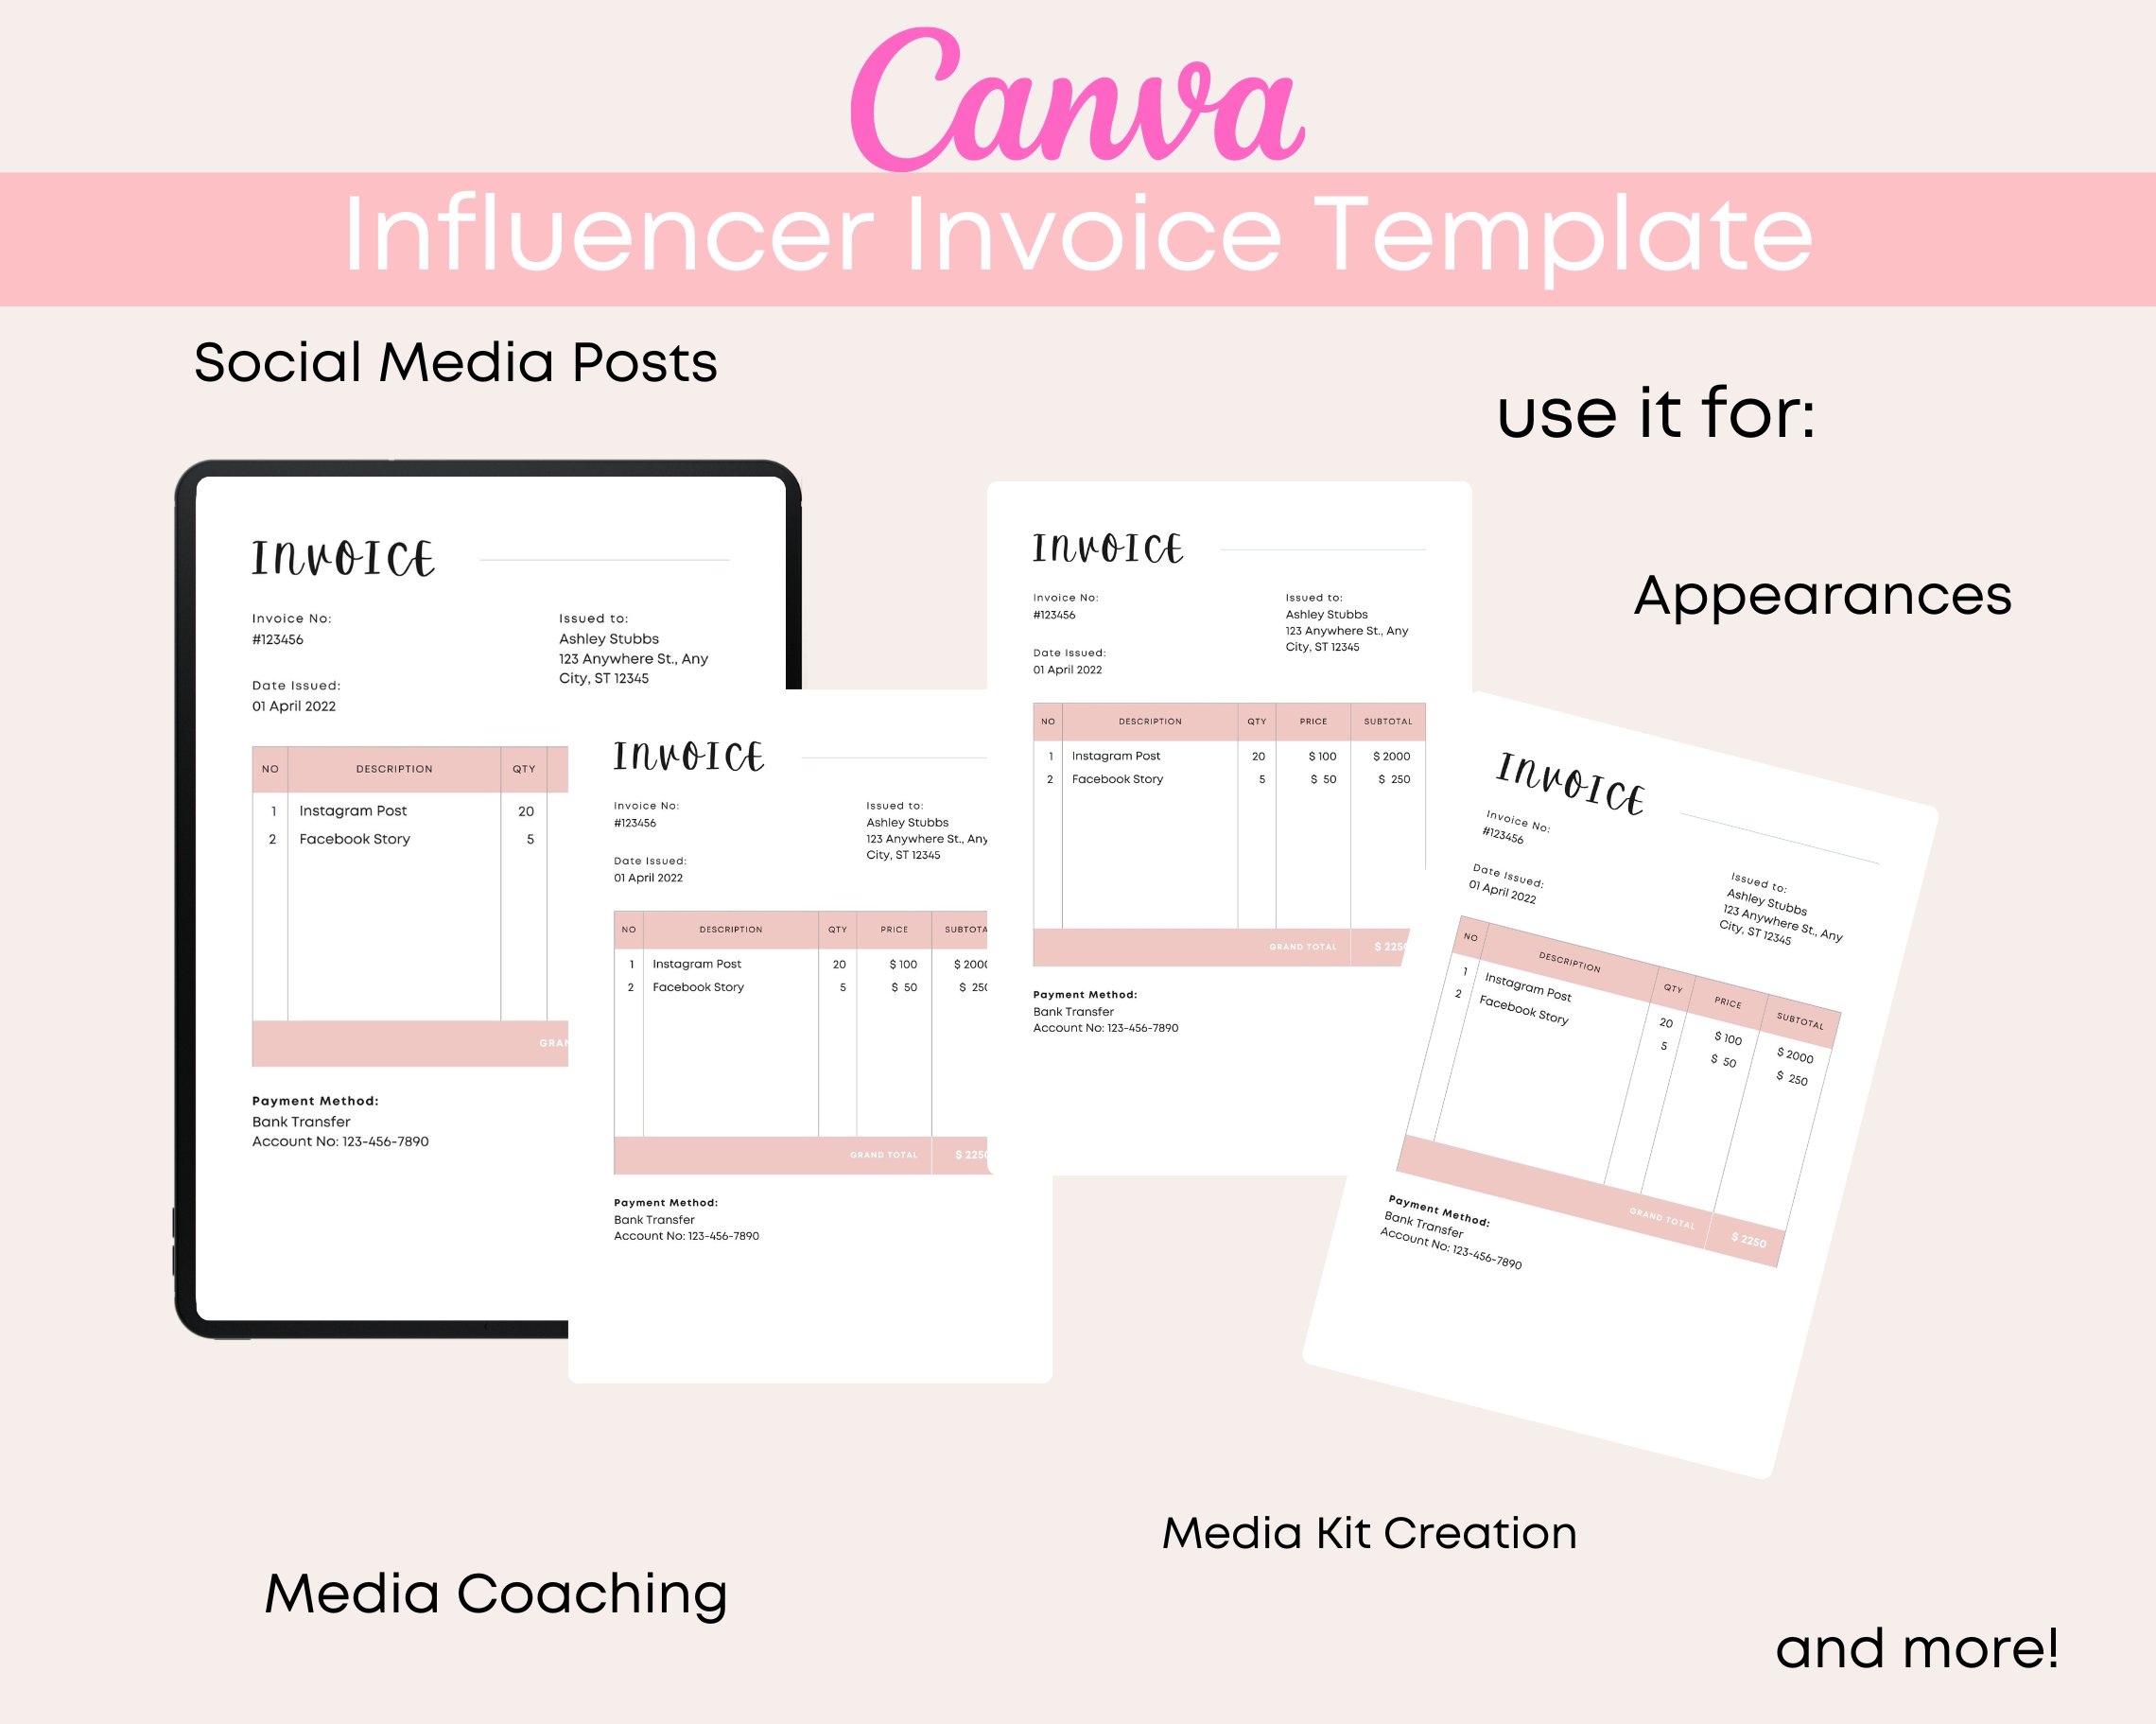 Invoice Template -Editable in Canva cover image.